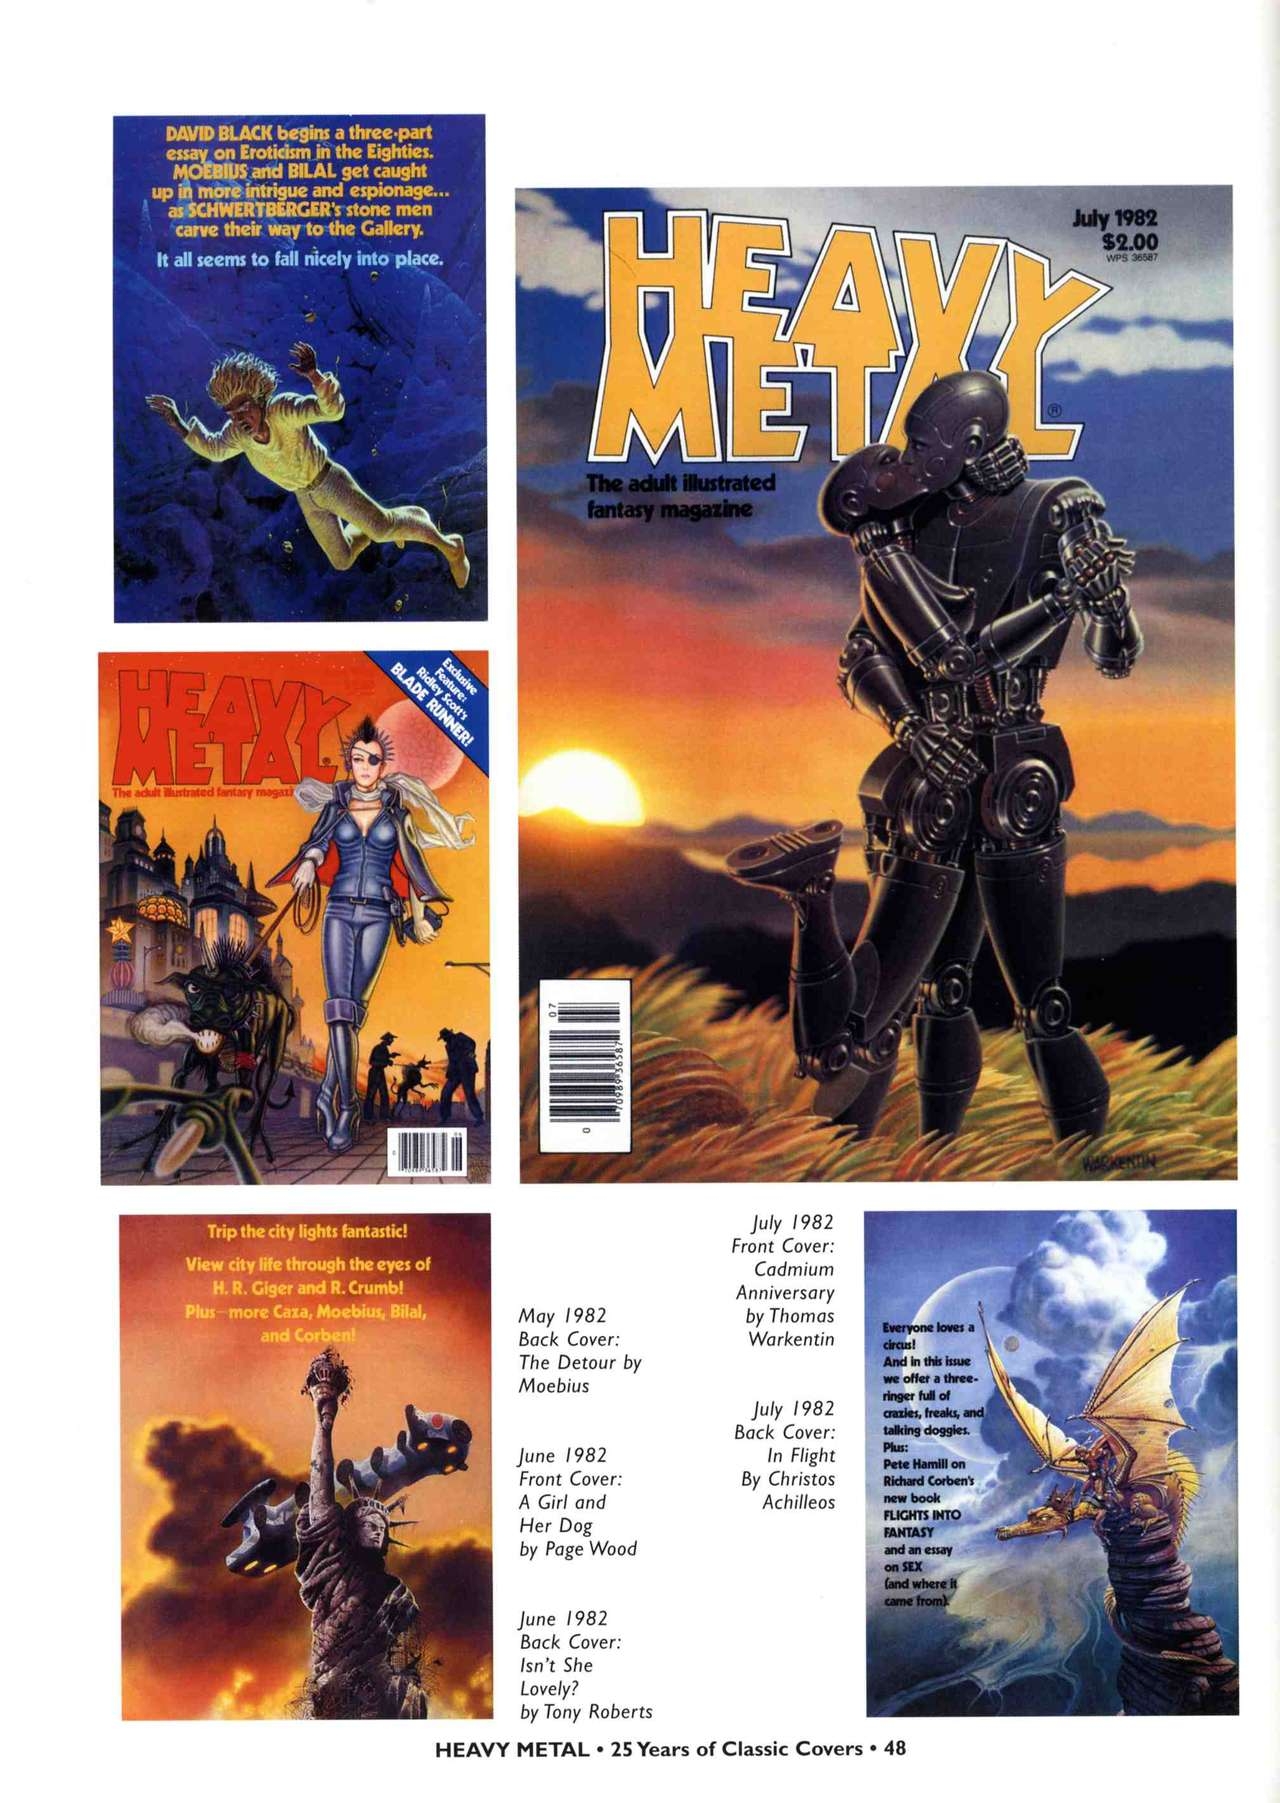 HEAVY METAL 25 Years of Classic Covers 53